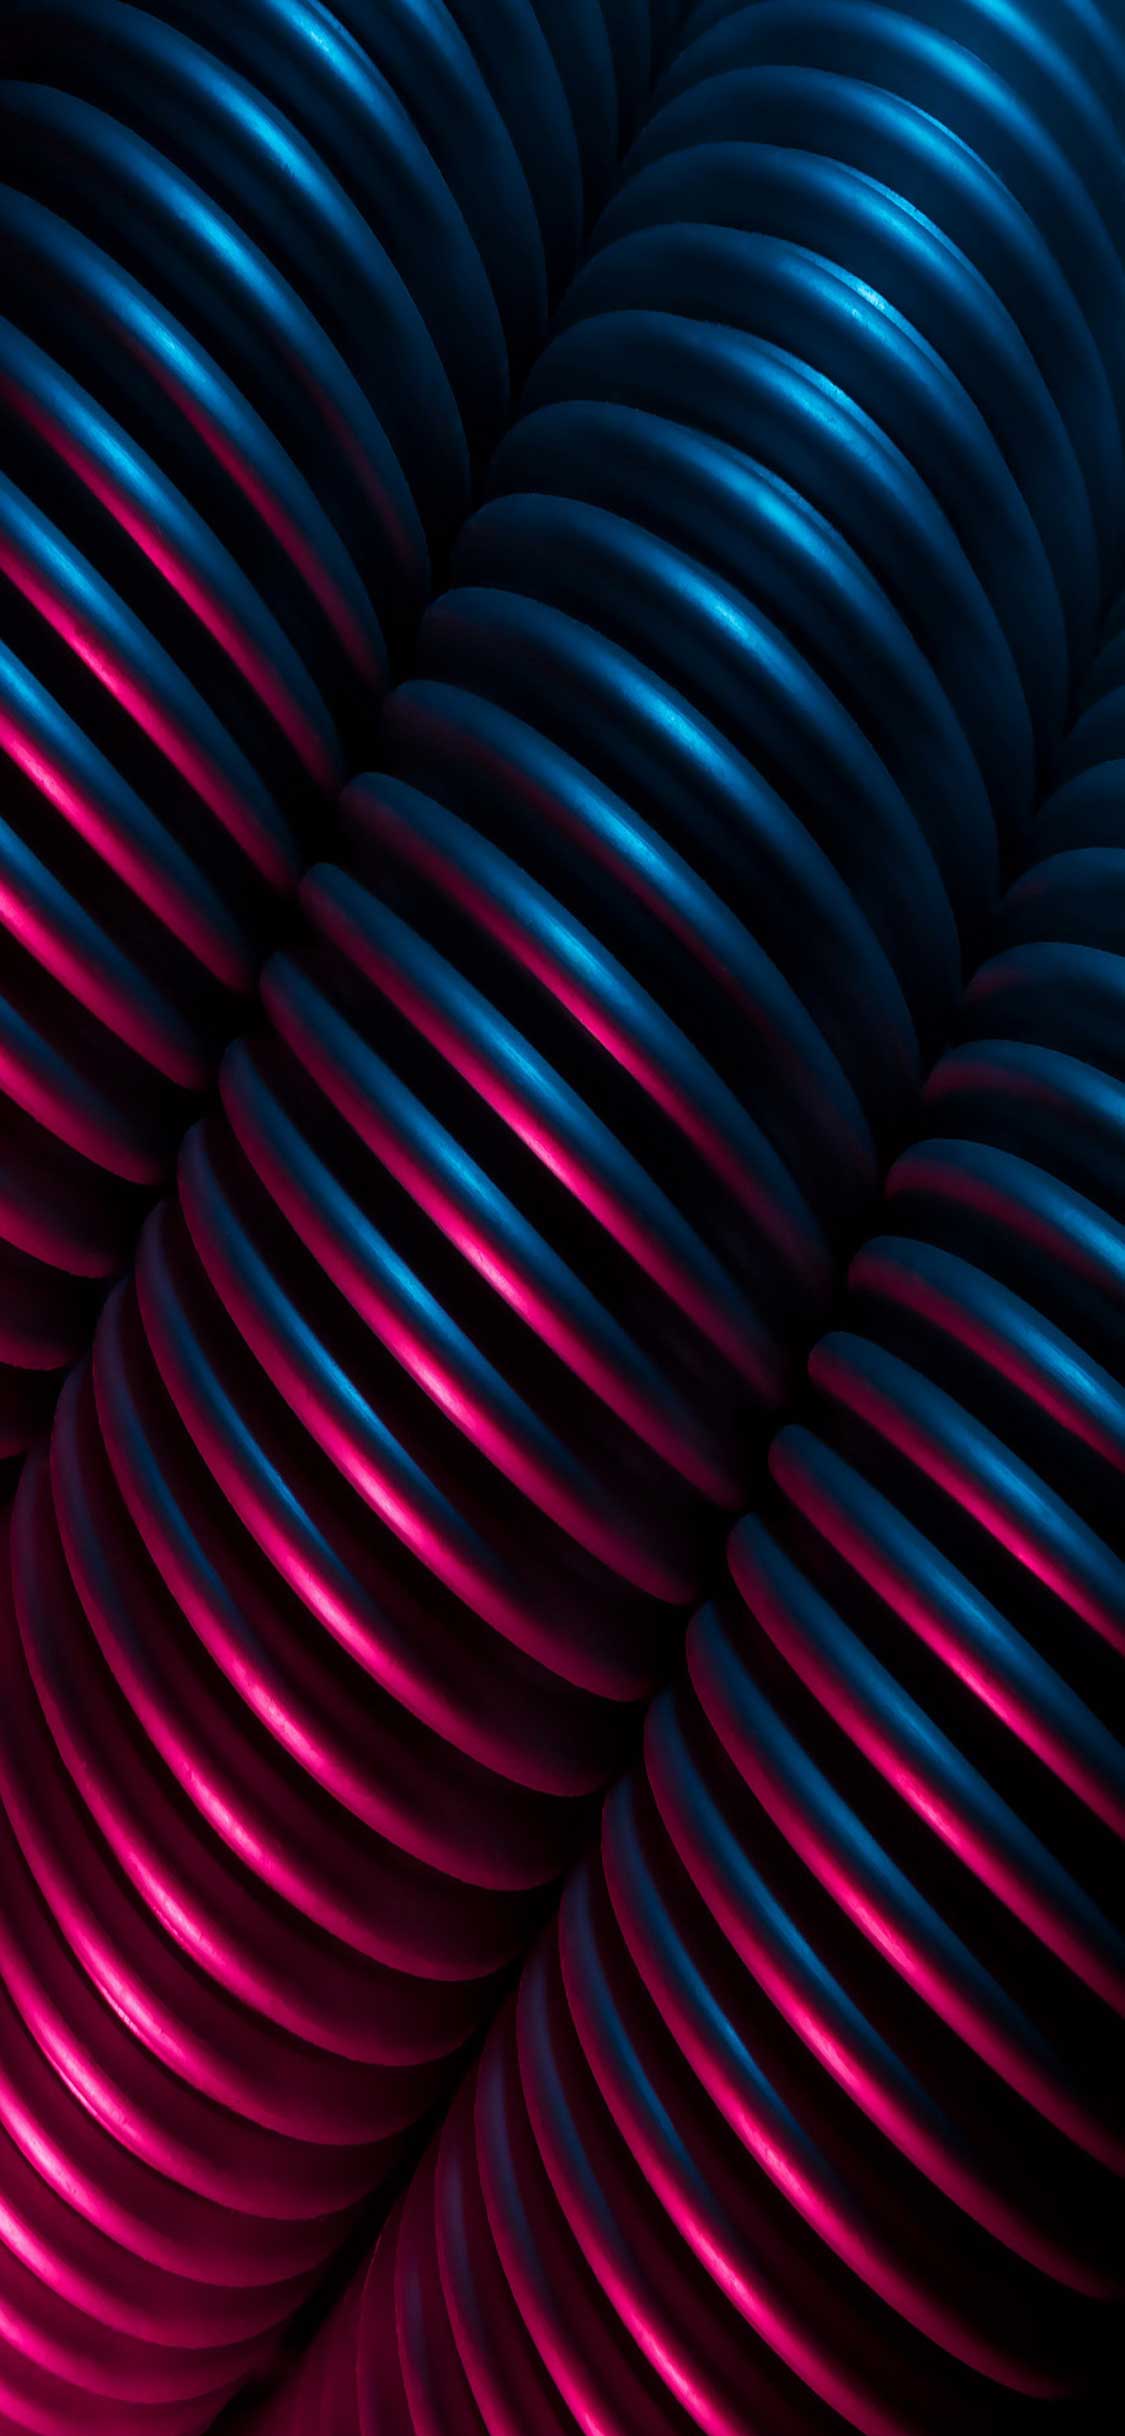 30+ New Cool iPhone X Wallpapers & Backgrounds to freshen ...